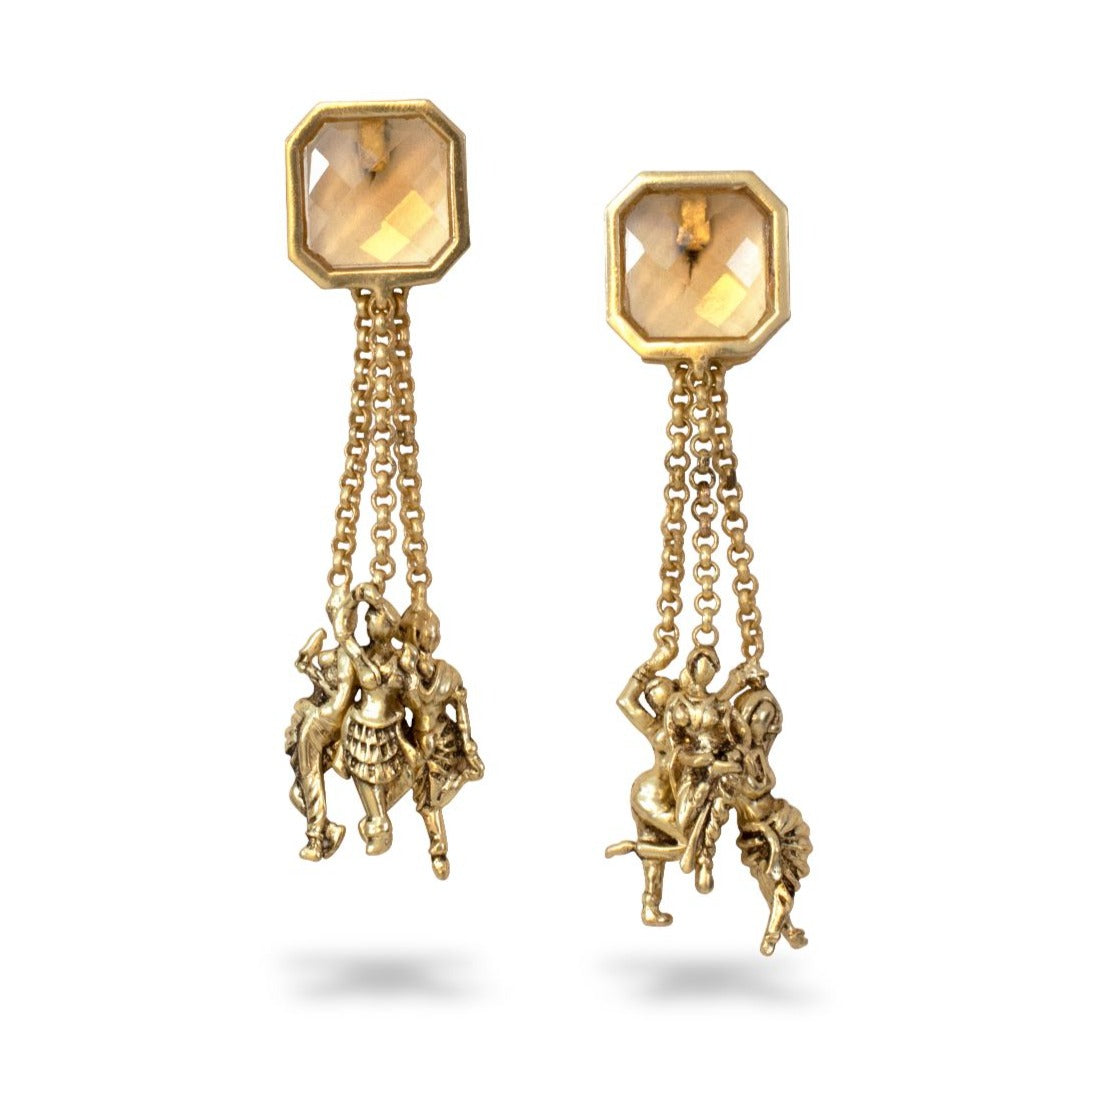 18ct Single Stone Screwback Earrings - The Diamonds Collection